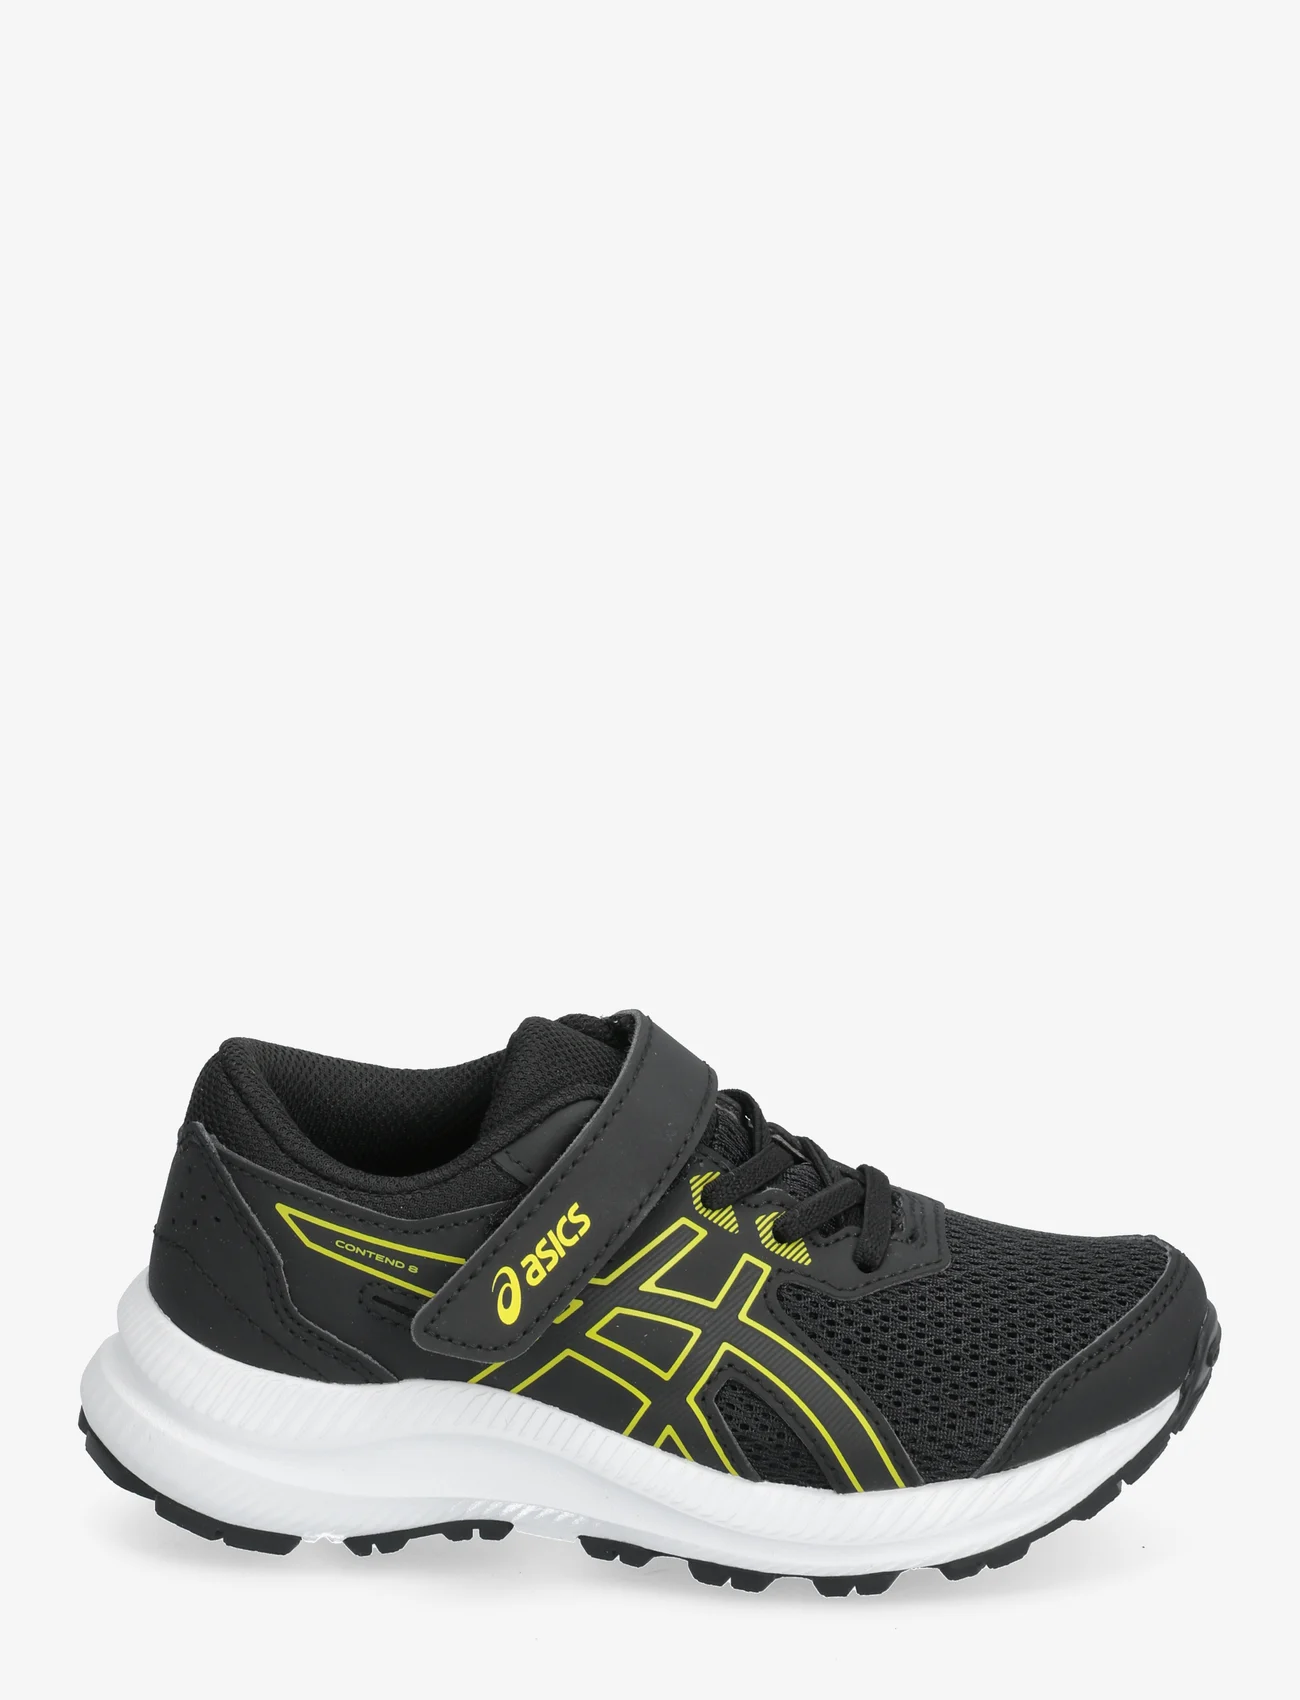 Asics - CONTEND 8 PS - running shoes - black/bright yellow - 1